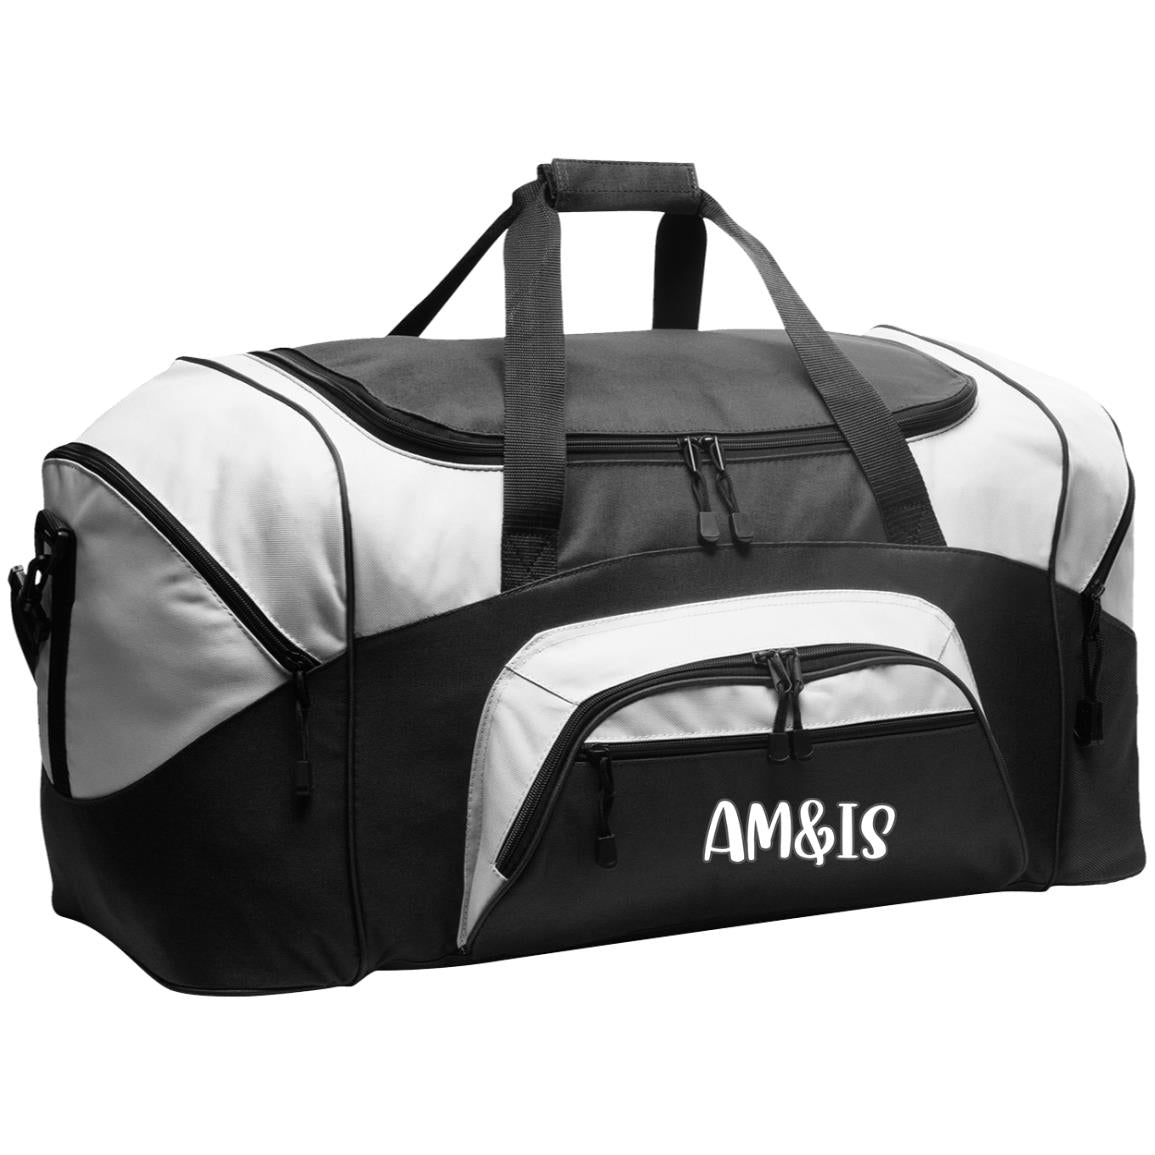 BLACK GRAY ONE SIZE - AM&IS Activewear Colorblock Sport Duffel - duffel bag at TFC&H Co.